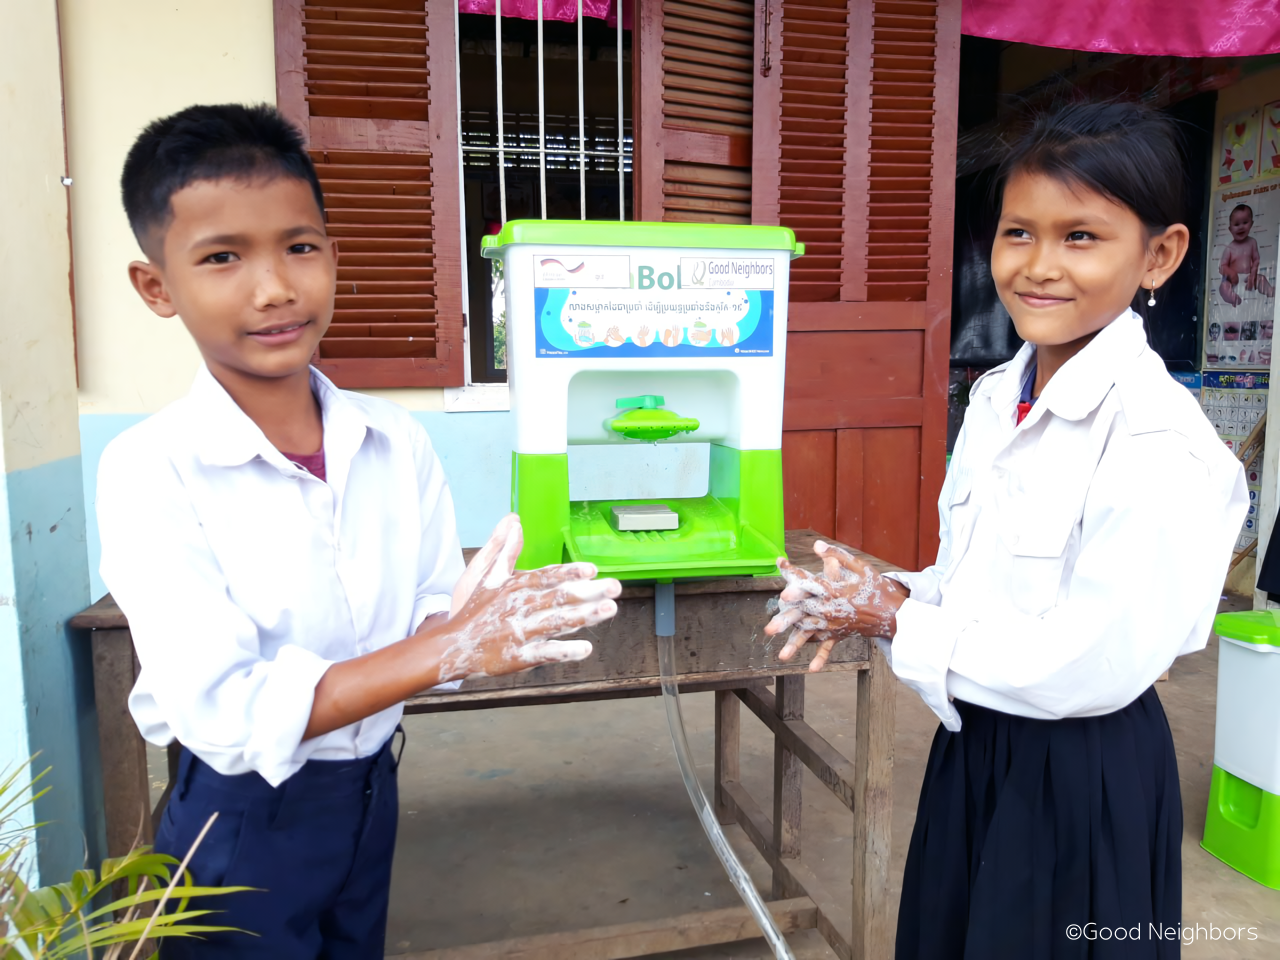 Good Neighbors Cambodia and GIZ installed clean water facilities at school and distribute hygiene materials to children in six CDPs.